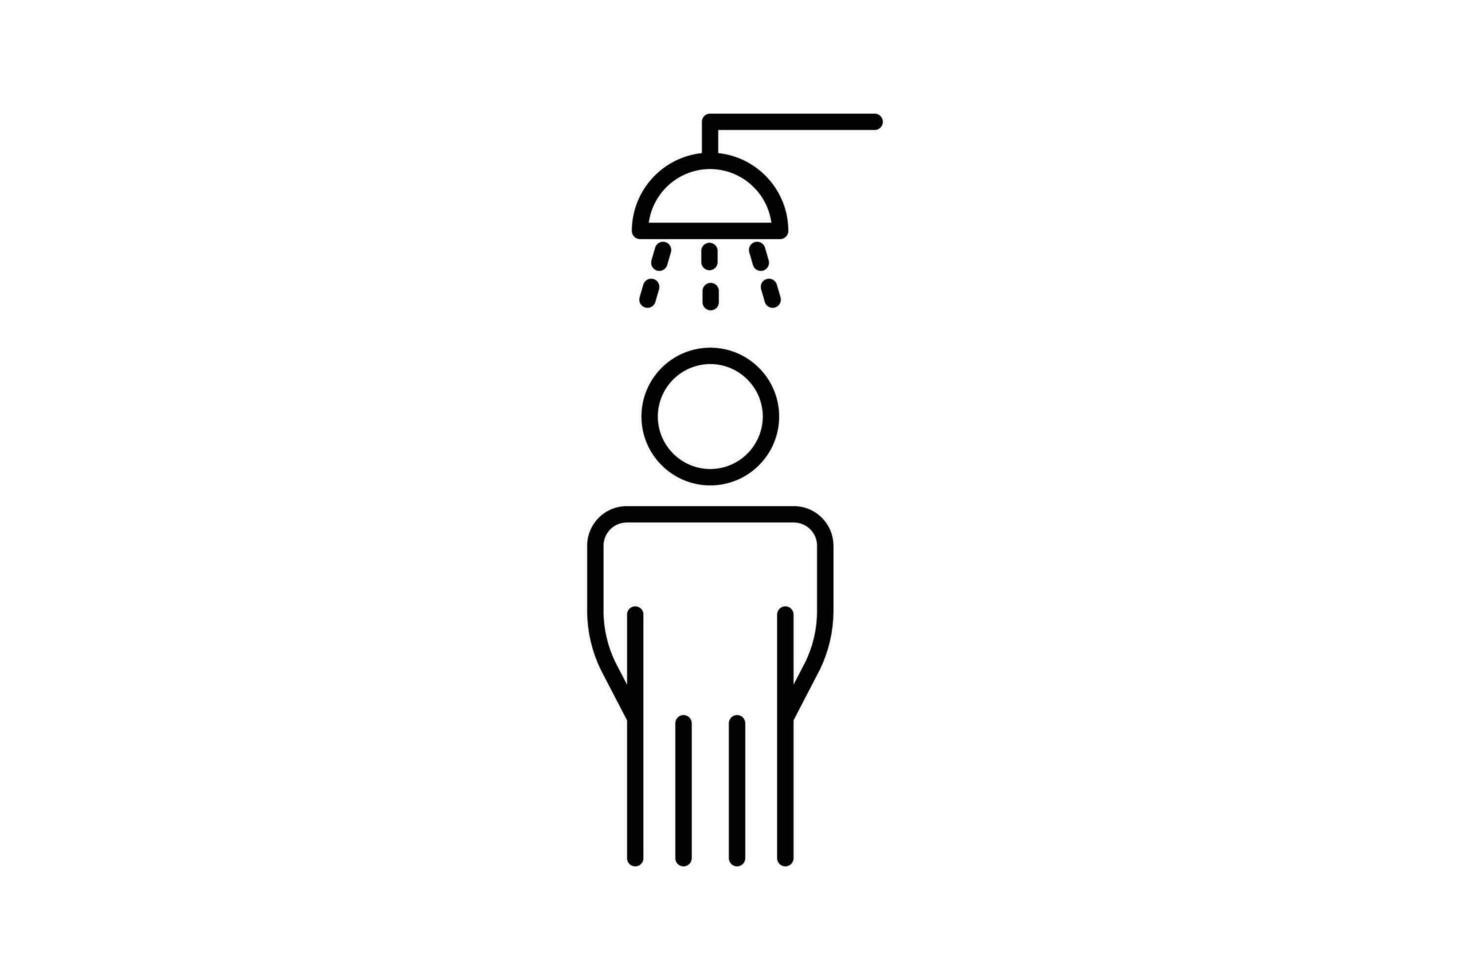 Shower icon. men showering. icon related to bathroom, hygiene. Line icon style design. Simple vector design editable